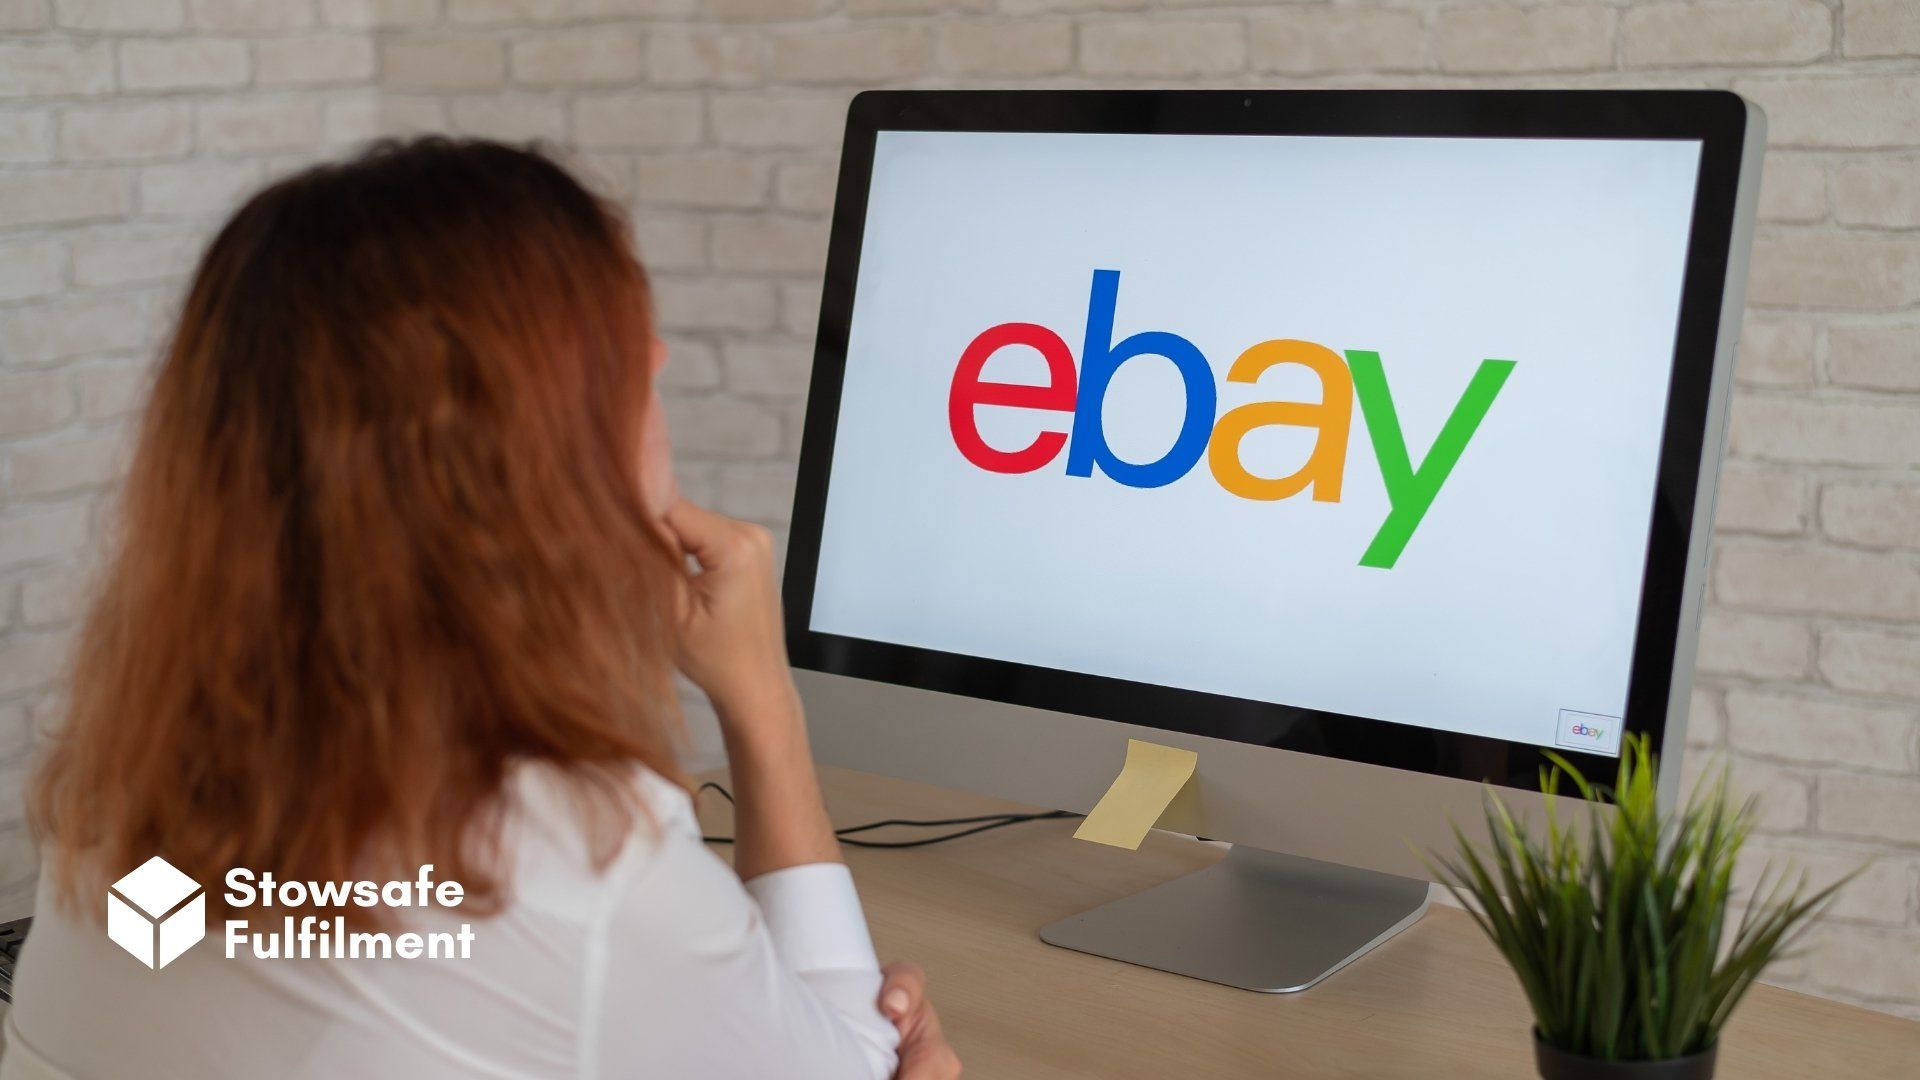 Starting to take eBay selling seriously? Then you need to match your customers' delivery expectations. Discover 11 shortcuts to selling success.